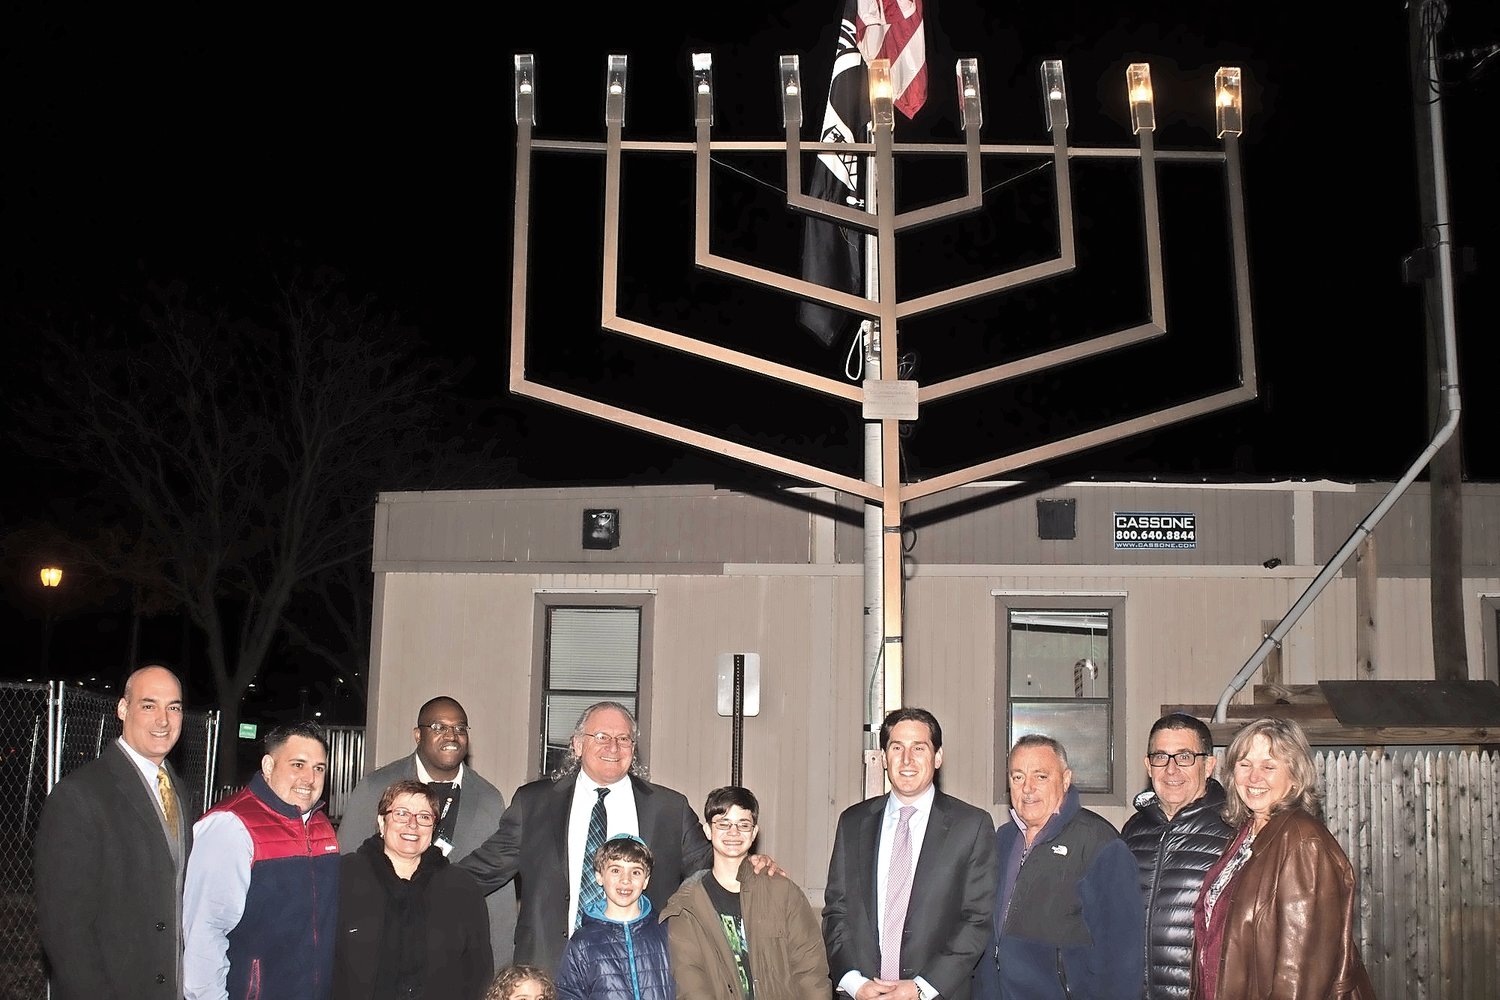 Community members gathered for the menorah lighting in 2015. This year, the fixture’s donor, Bernard Ross, will be honored at the ceremony on Dec. 22.